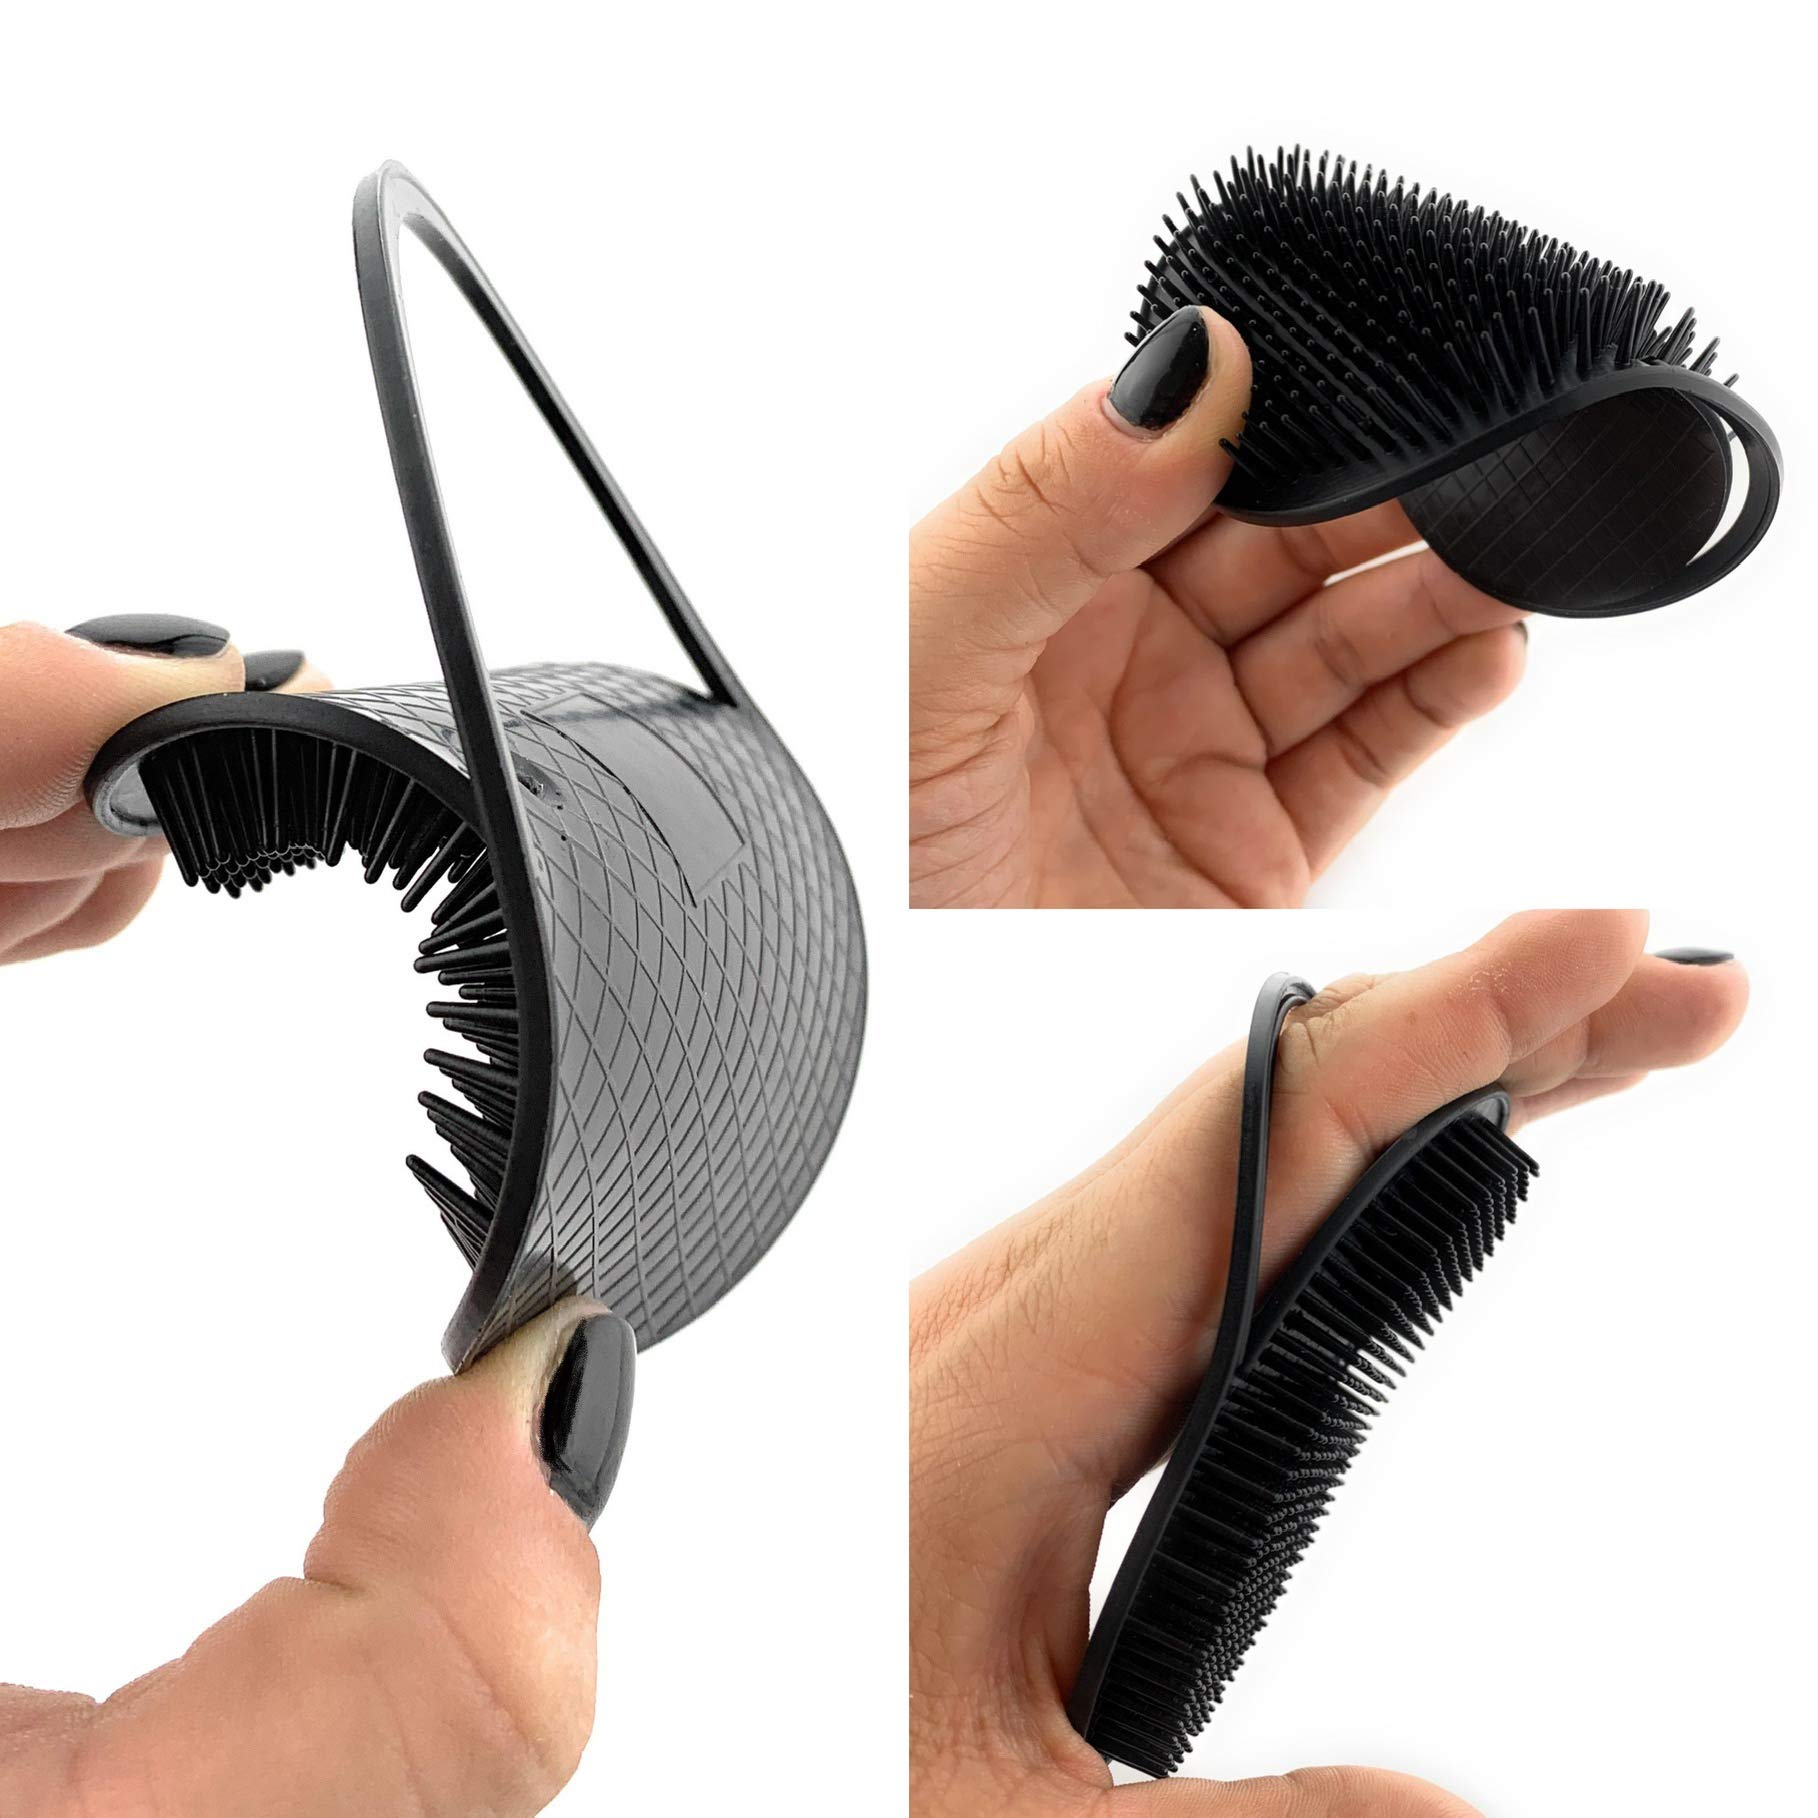 GBS Head Shampoo Brush. Hair Growth Massager Anti Dandruff Brush Hair Scalp Massager Scalp Care Brush Soft Palm Scrubber Comb Pocket Shower for Curly and Dry Hairs. Travel Pack 3 (1 Black, 2 Grey)